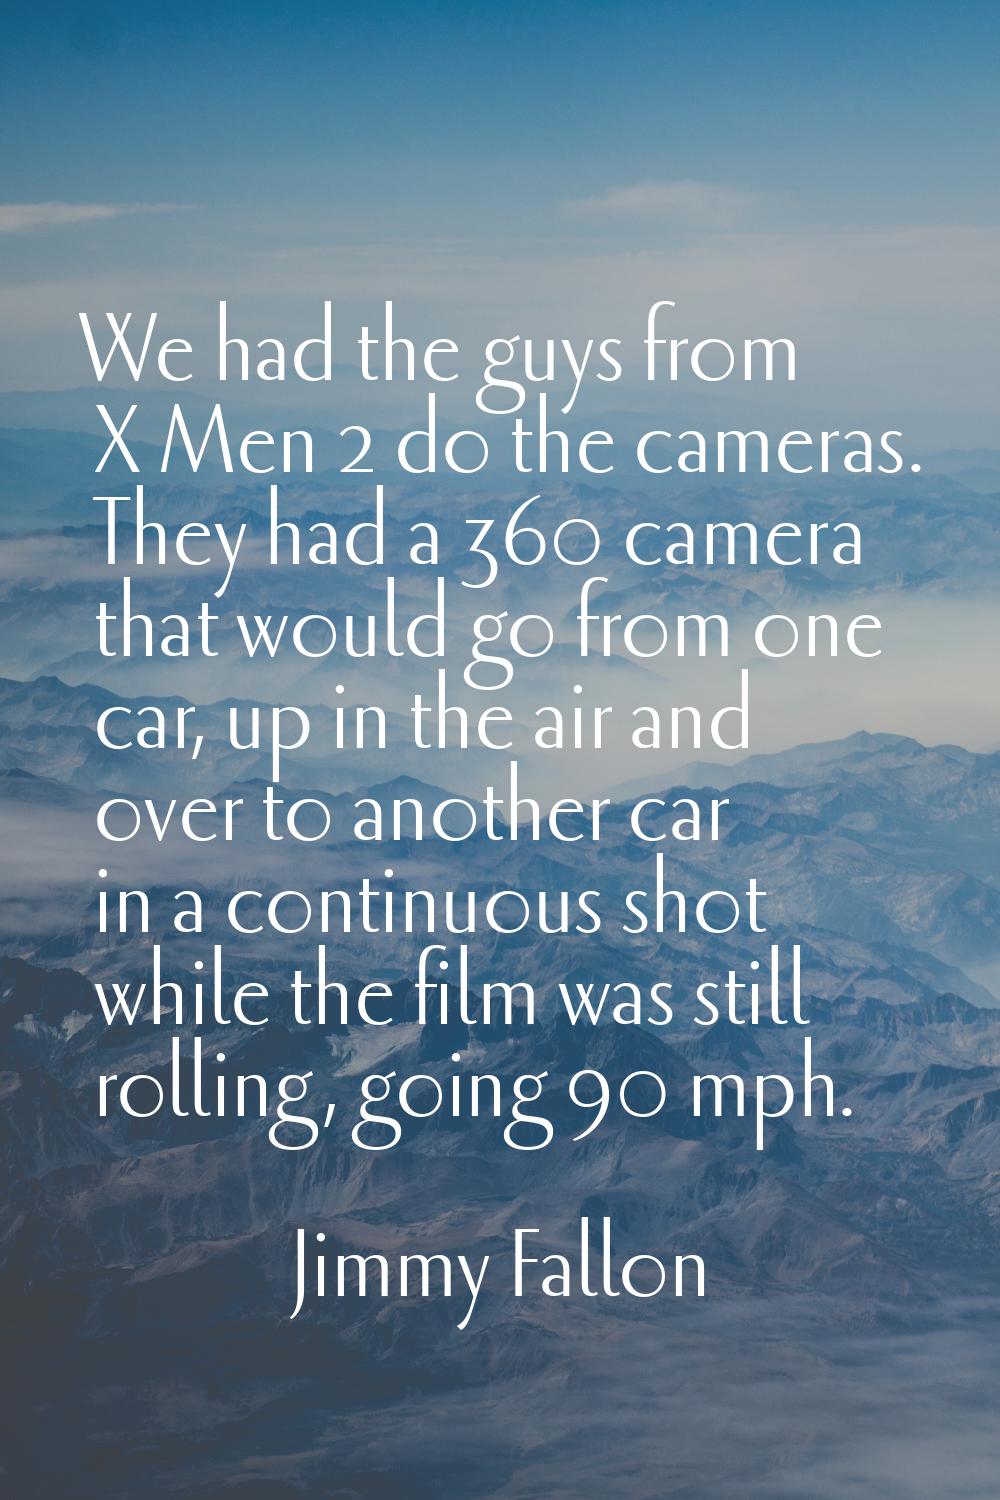 We had the guys from X Men 2 do the cameras. They had a 360 camera that would go from one car, up i